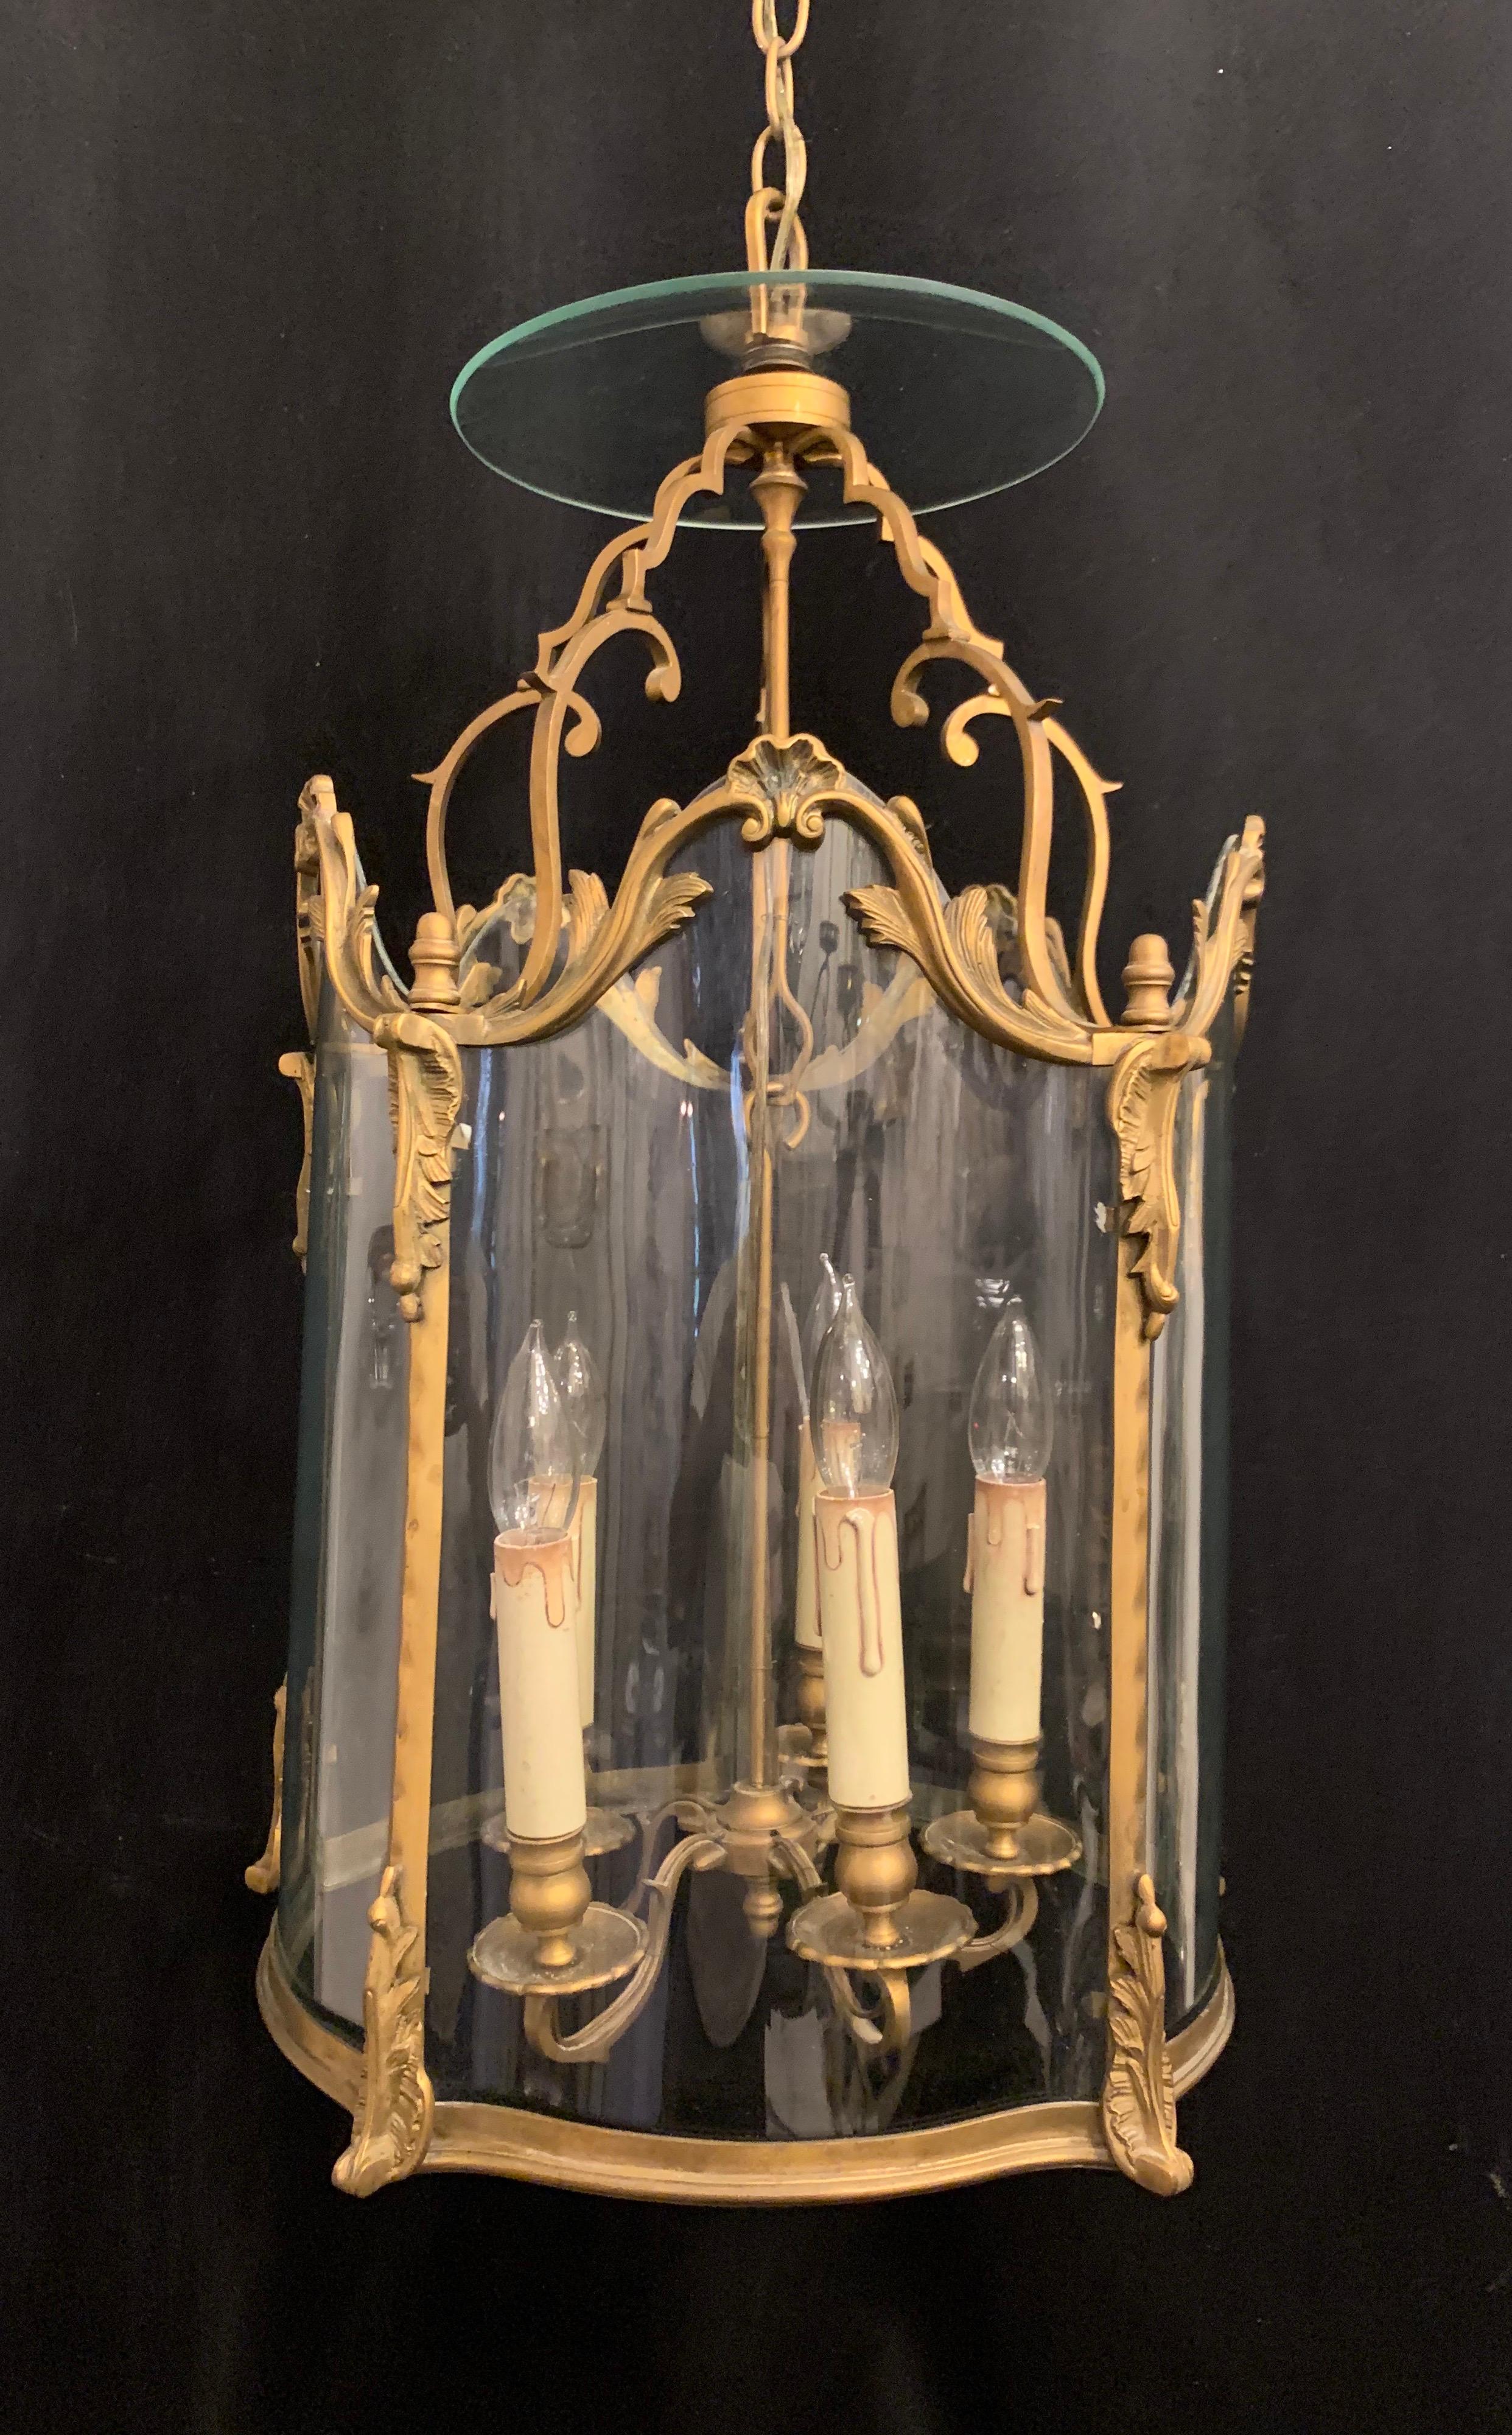 A wonderful French Louis XVI gilt bronze and curved panel glass lantern fixture with 5 candelabra sockets, rewired and ready to install with chain canopy and mounting hardware.